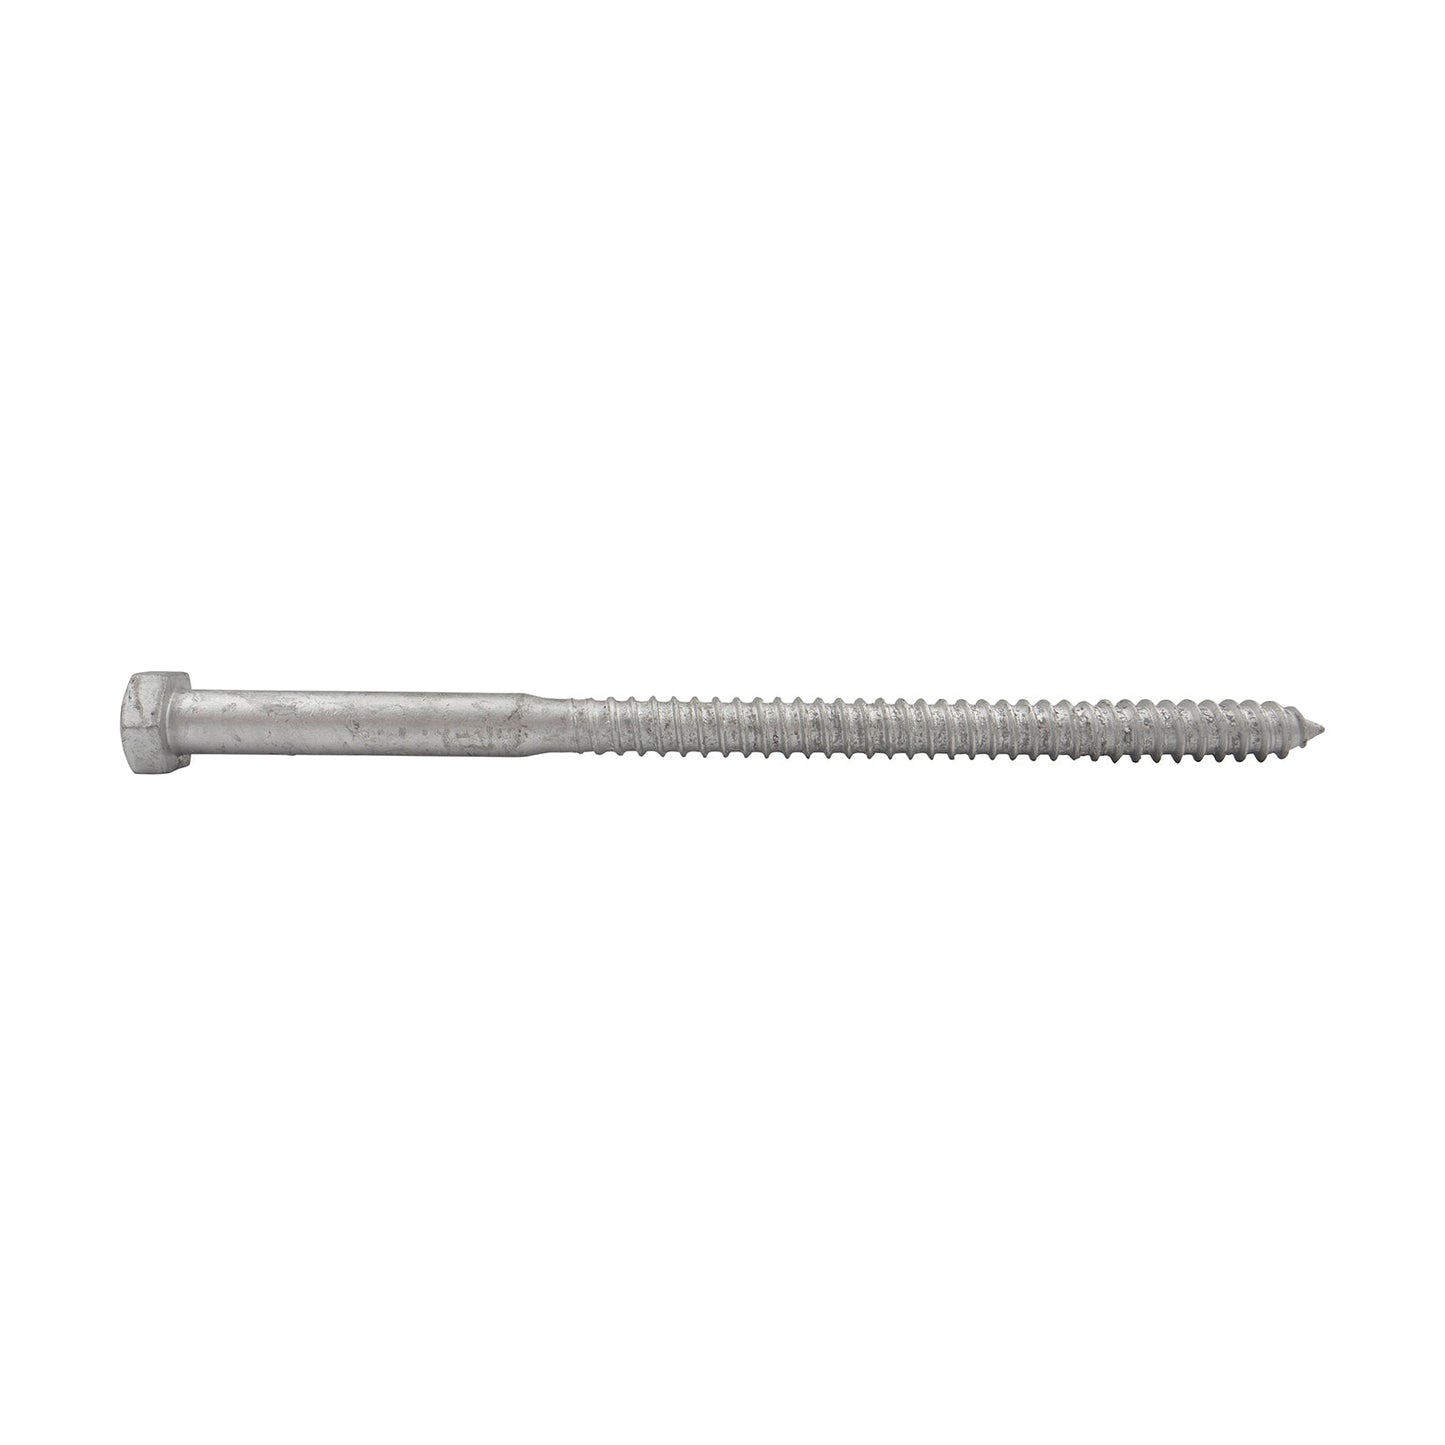 5/8"-5 x 11" Conquest Hex Head Lag Bolt for Wood - Hot Dip Galvanized